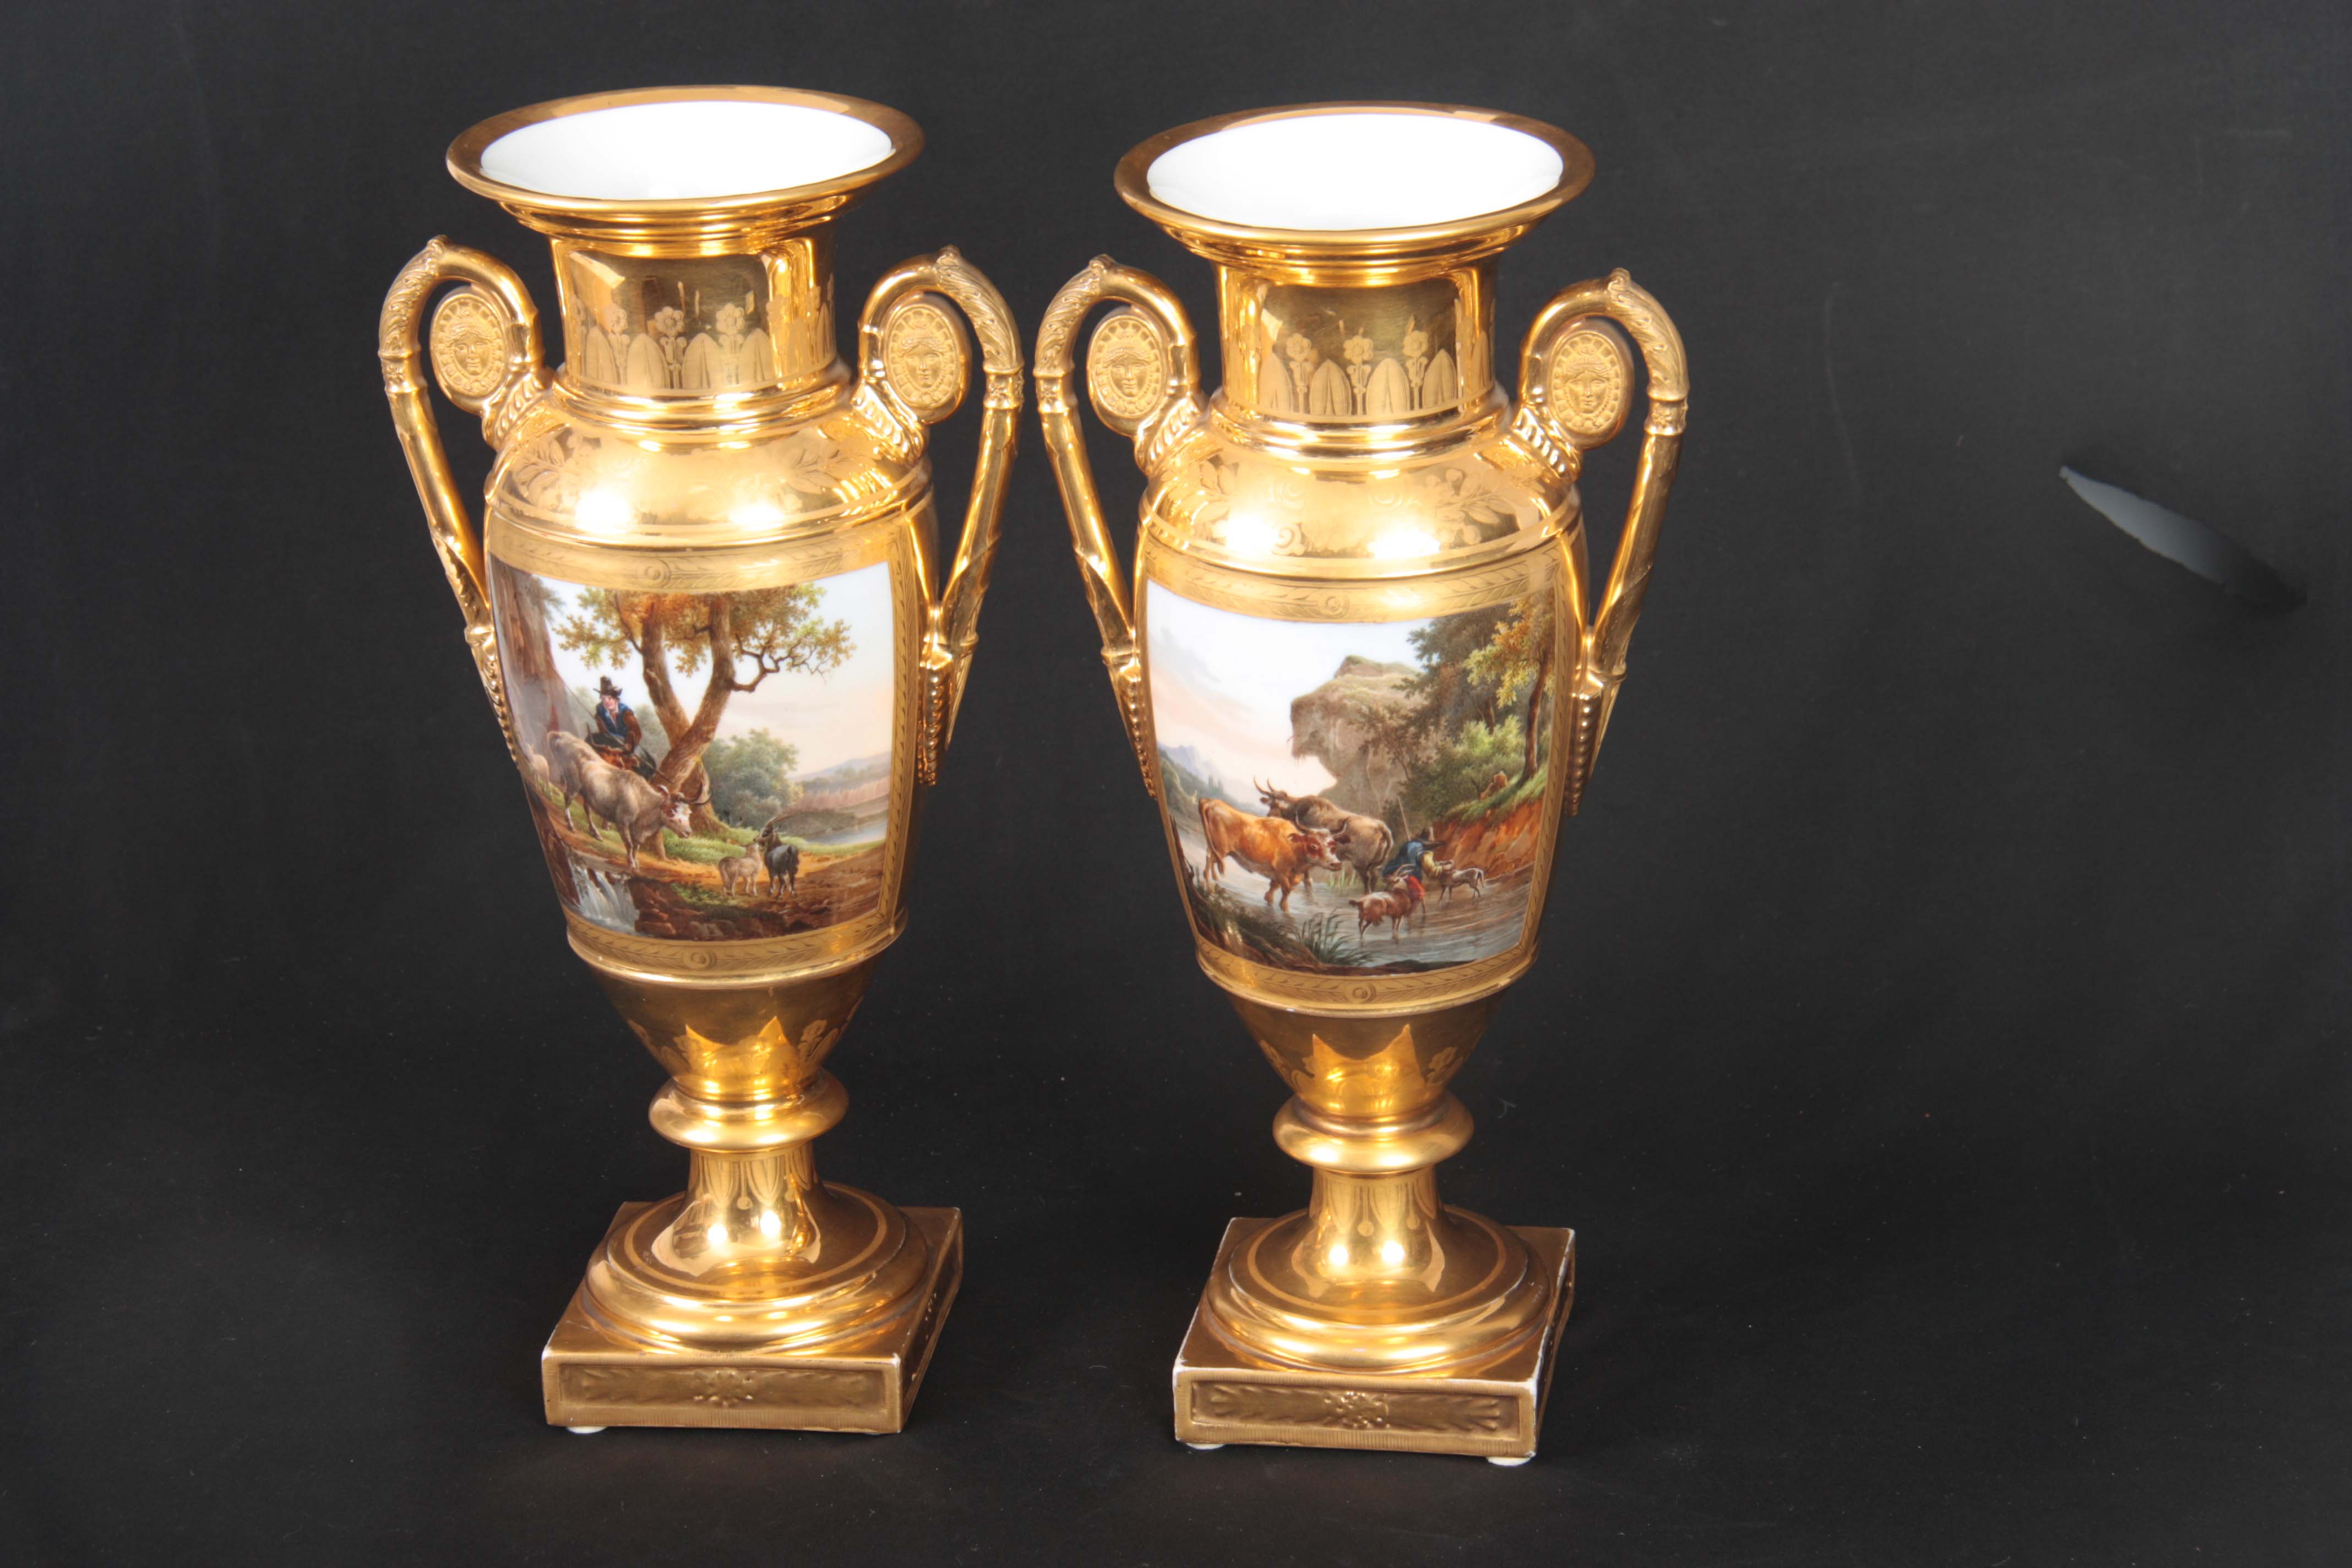 A PAIR OF EARLY 19TH CENTURY FRENCH EMPIRE PORCELAIN VASES of classical urn-shape with medallion-set - Image 3 of 12